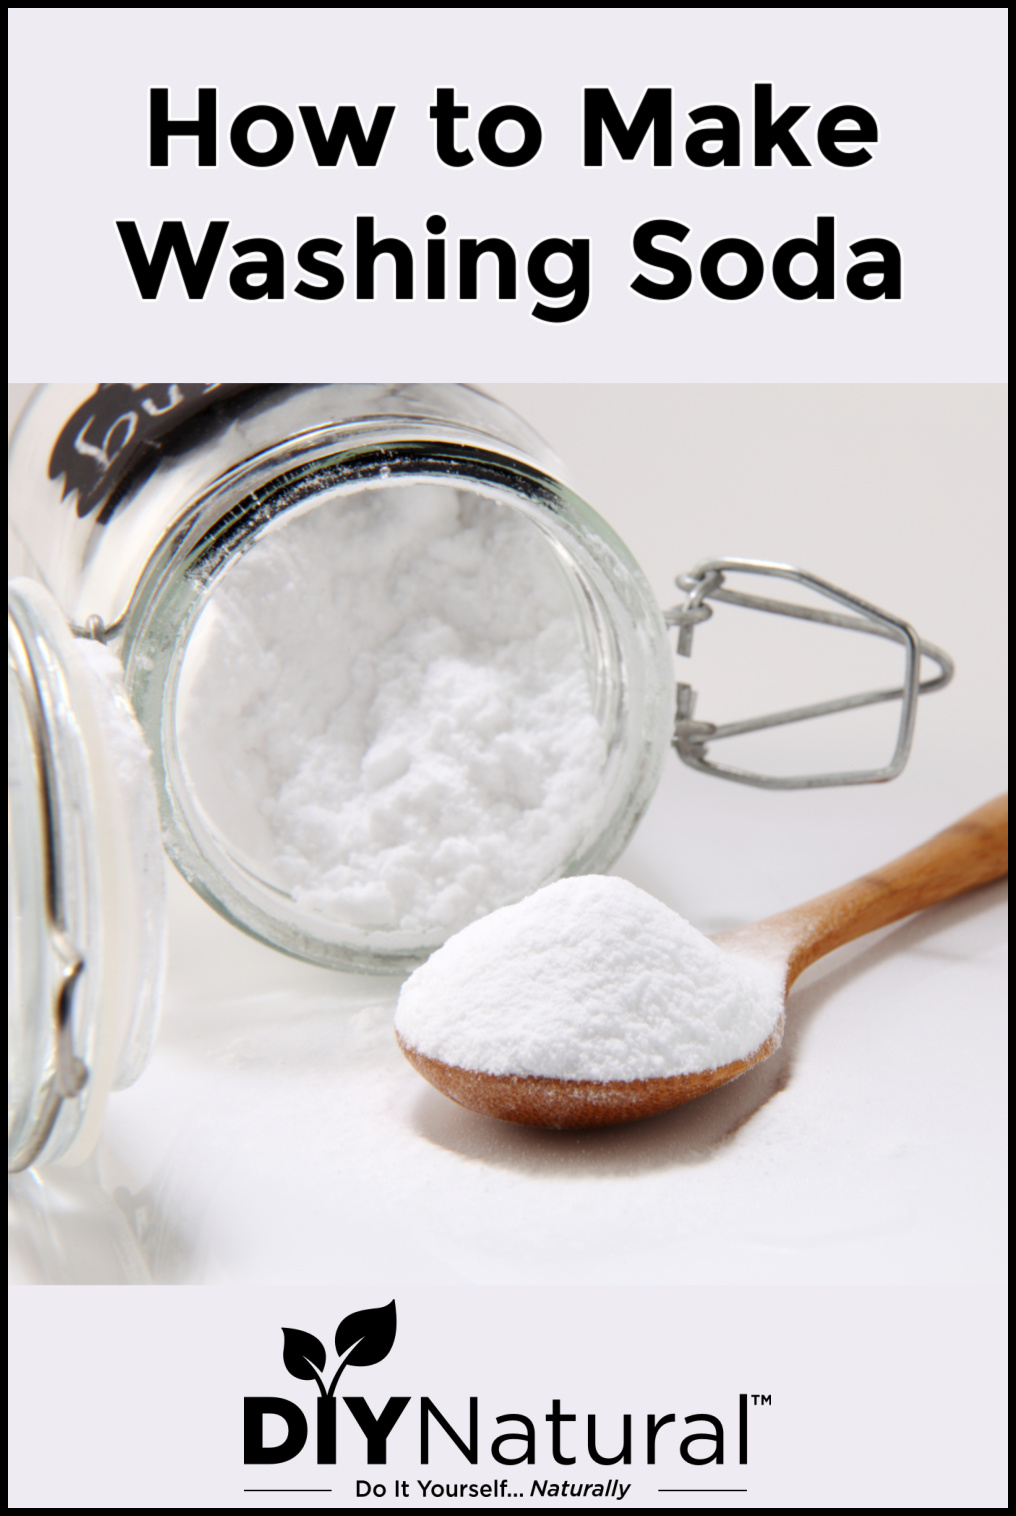 How to Make Washing Soda: Learn This Simple and Inexpensive Process!